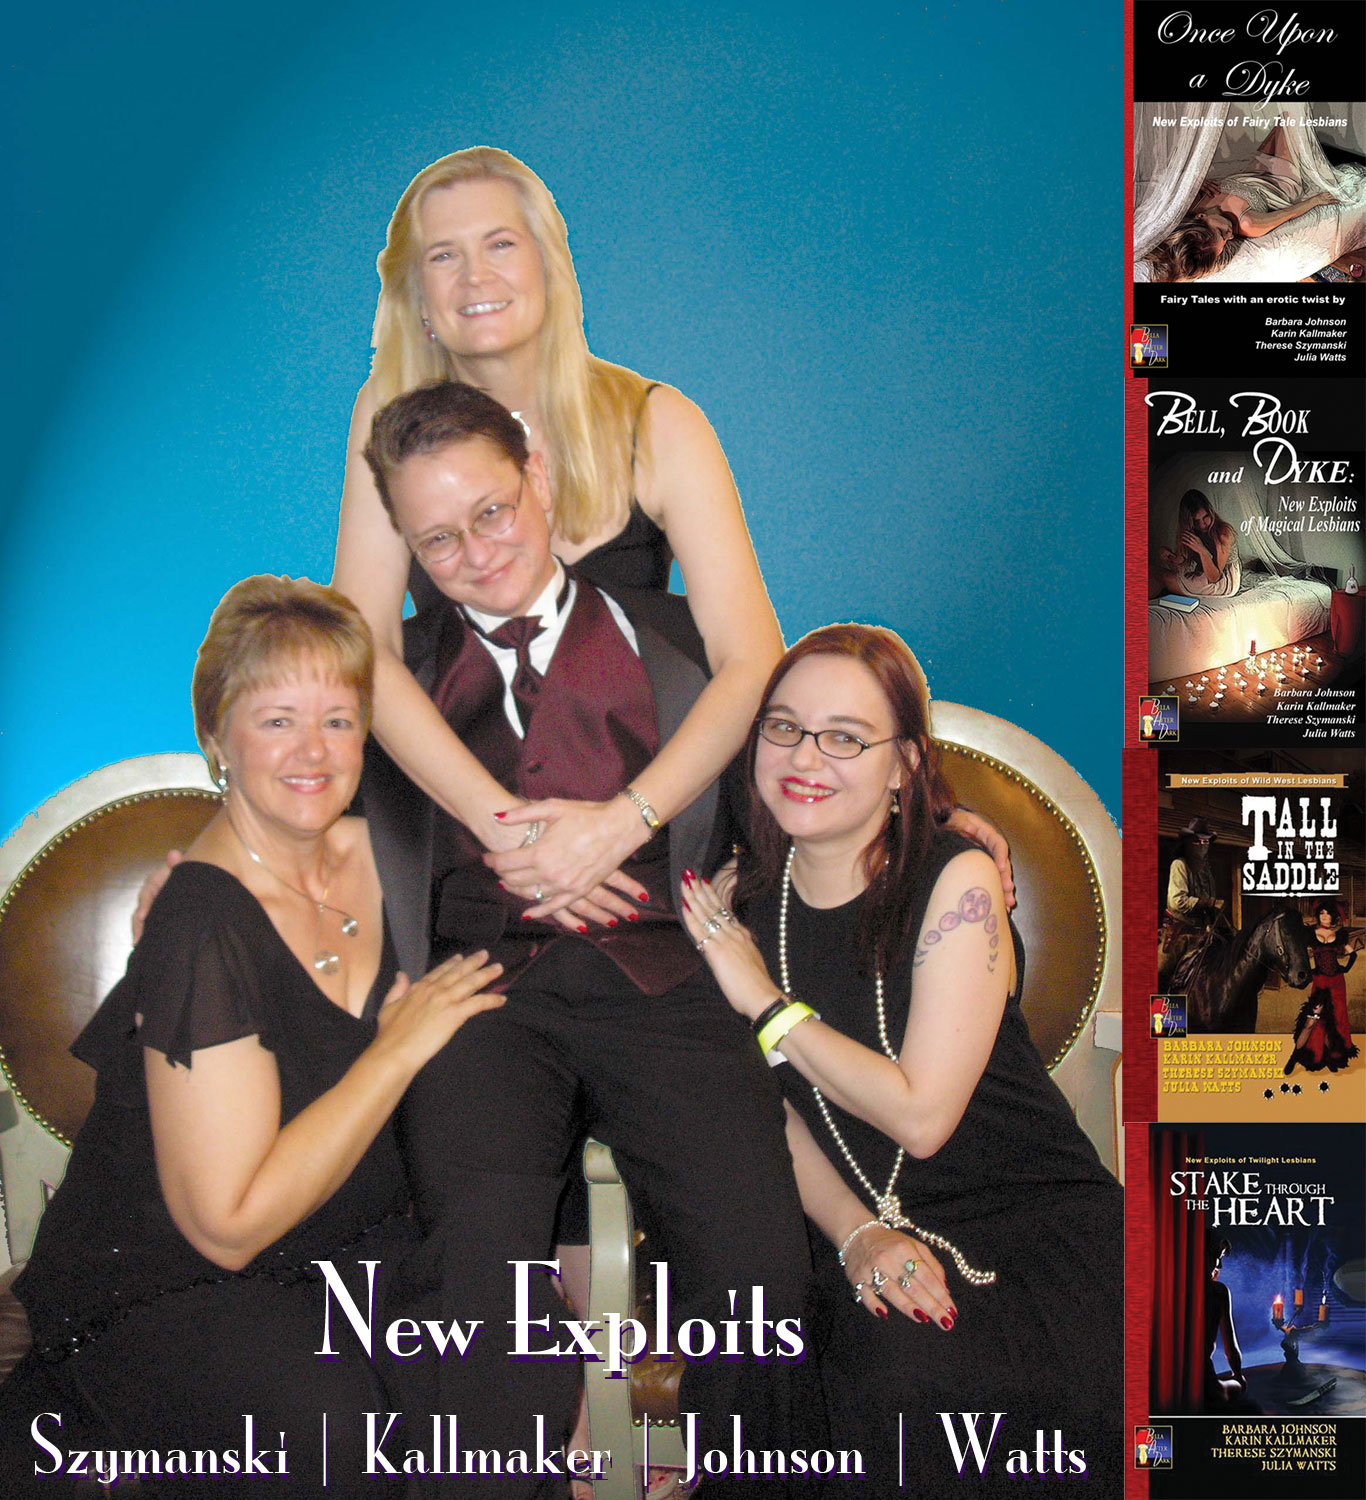 A picture of Karin Kallmaker, Barbara Johnson and Julia Watts all draped around Therese (Reese) Szymanski, who is sitting in a chair. To the side are the four covers from the New Exploits series of books. Over it all, it has the author's names and the words, "New Exploits."